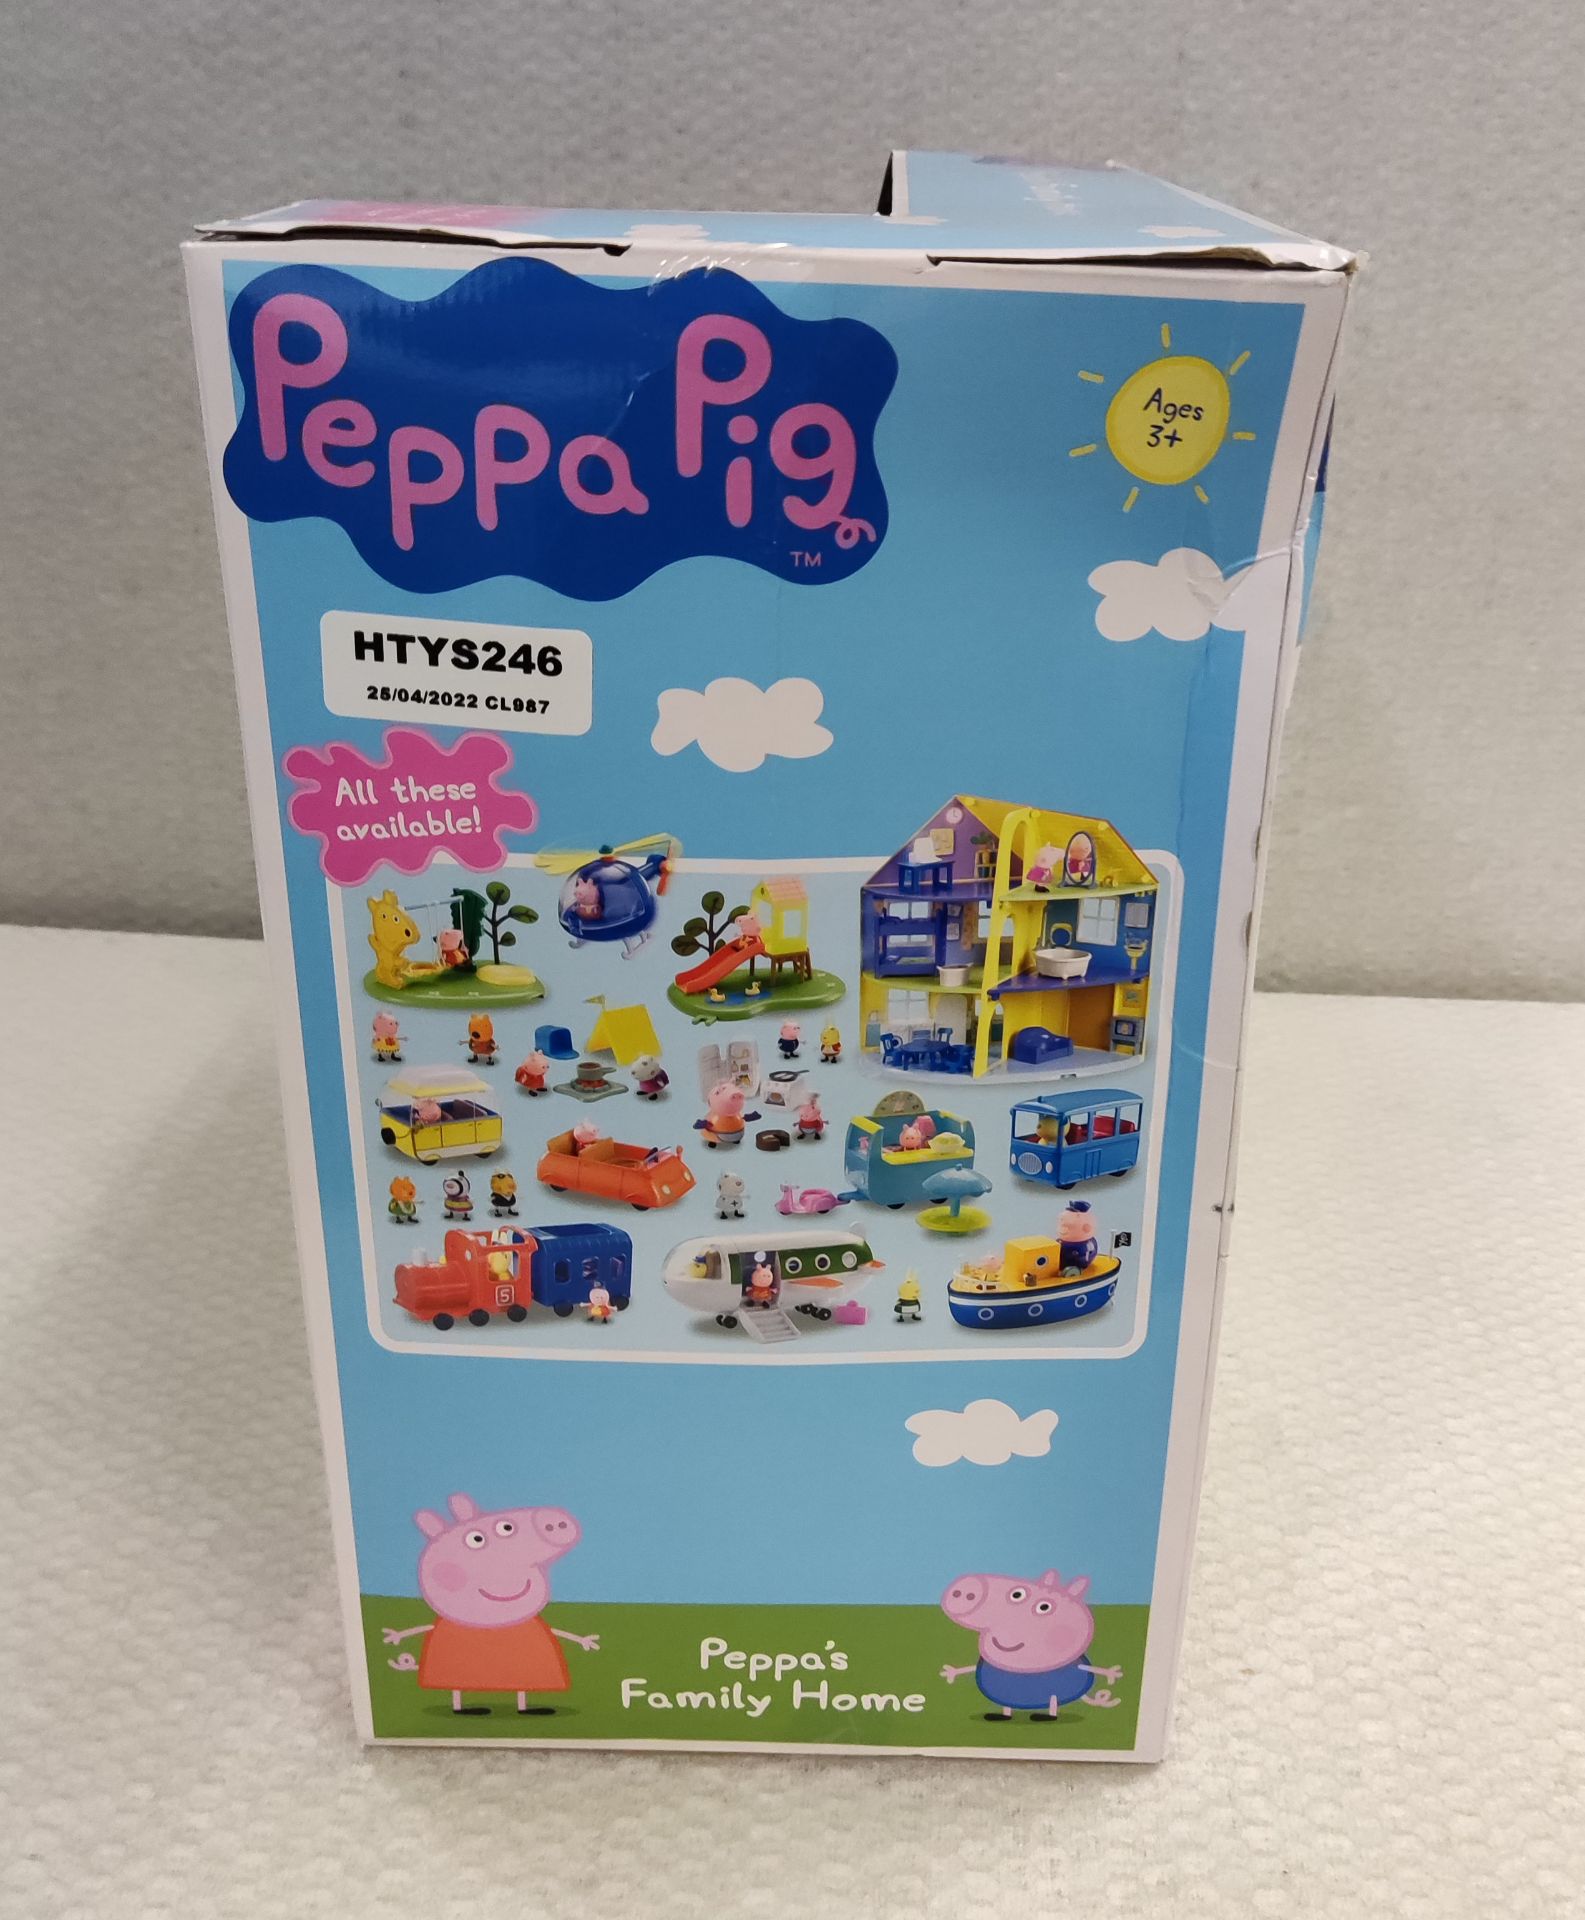 1 x Peppa Pig Peppa's Family Home Play Set - New/Boxed - Image 5 of 6